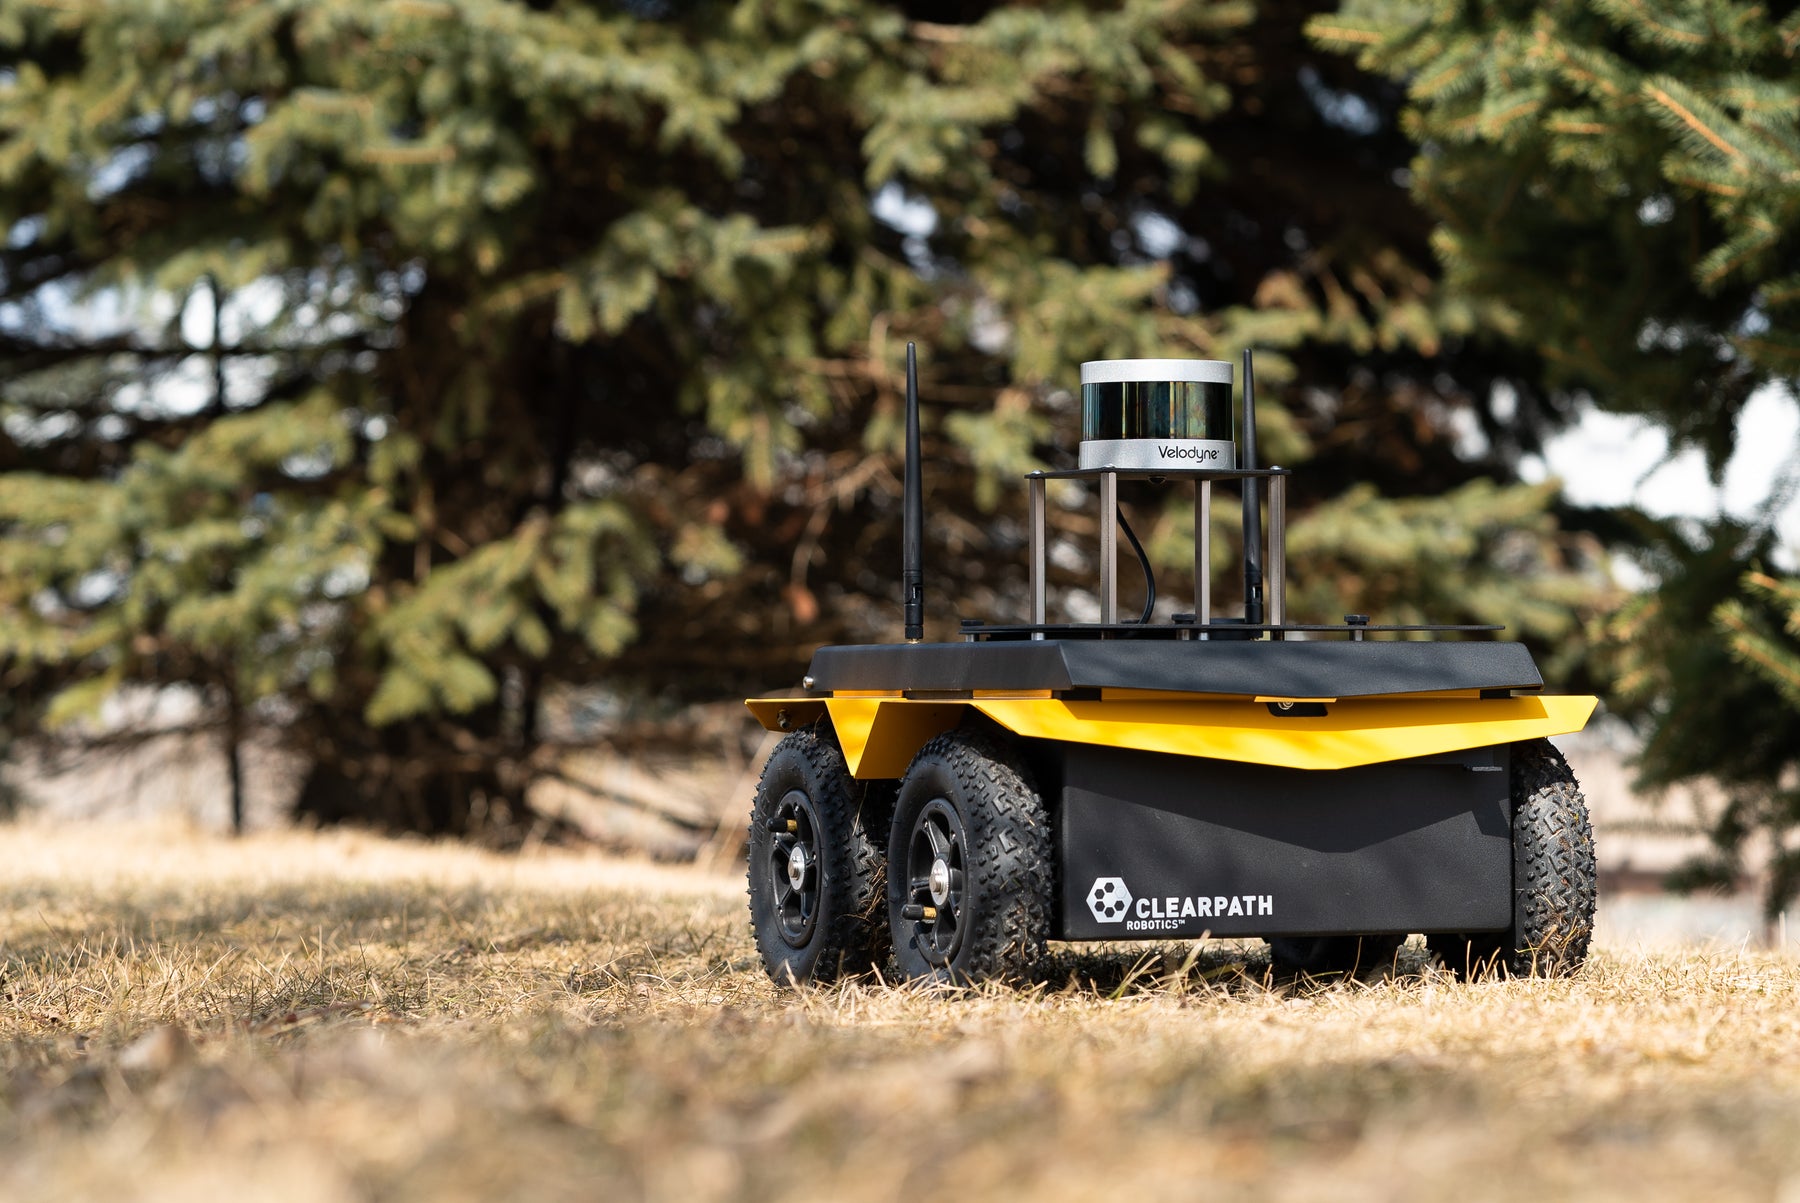 Clearpath Brings Velodyne LiDAR Technology to Robotics Community as Value-added Partner